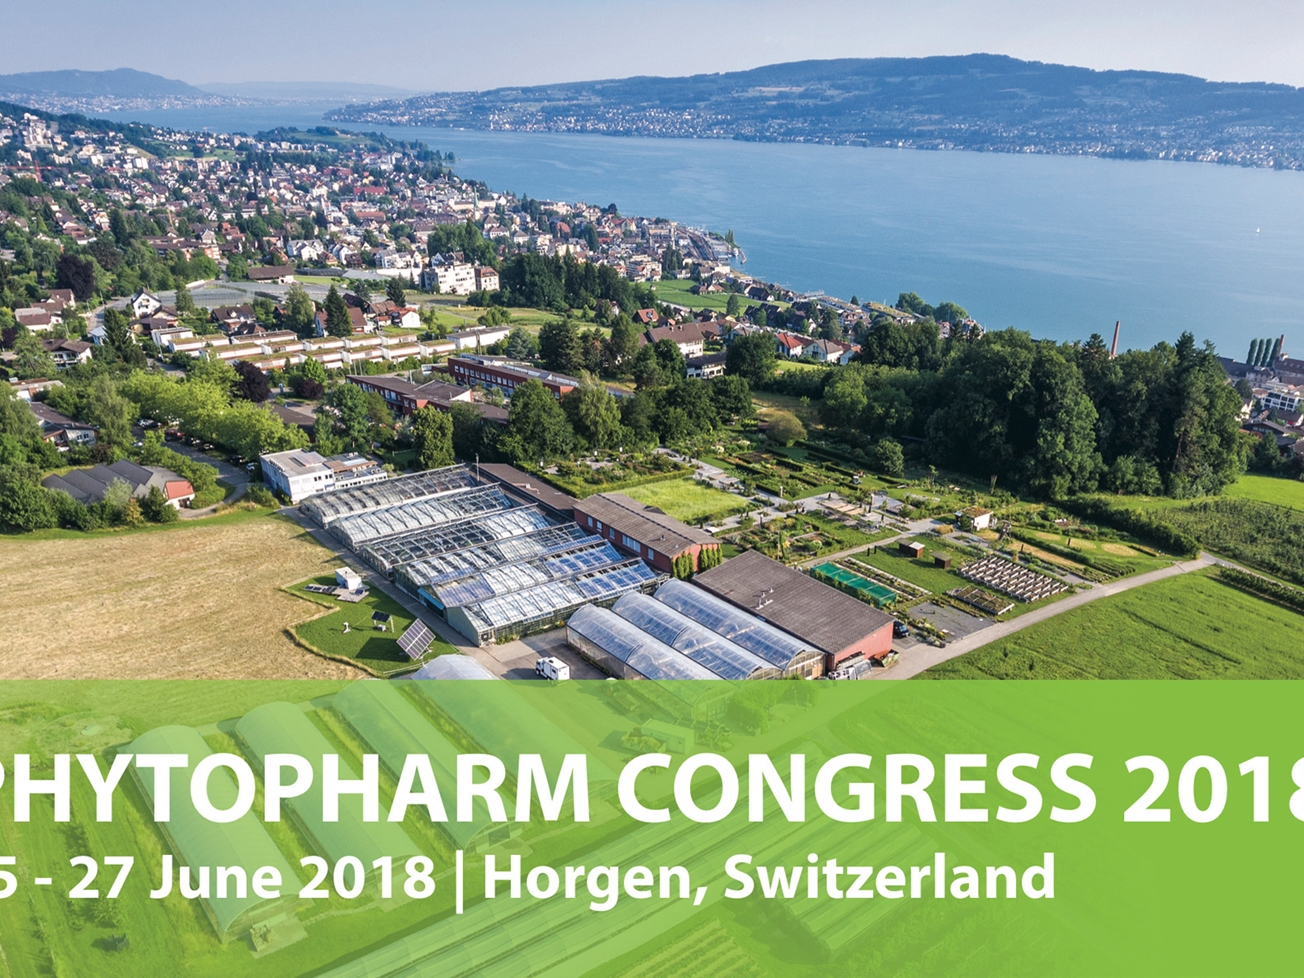 Join the Phytopharm Congress in Switzerland!